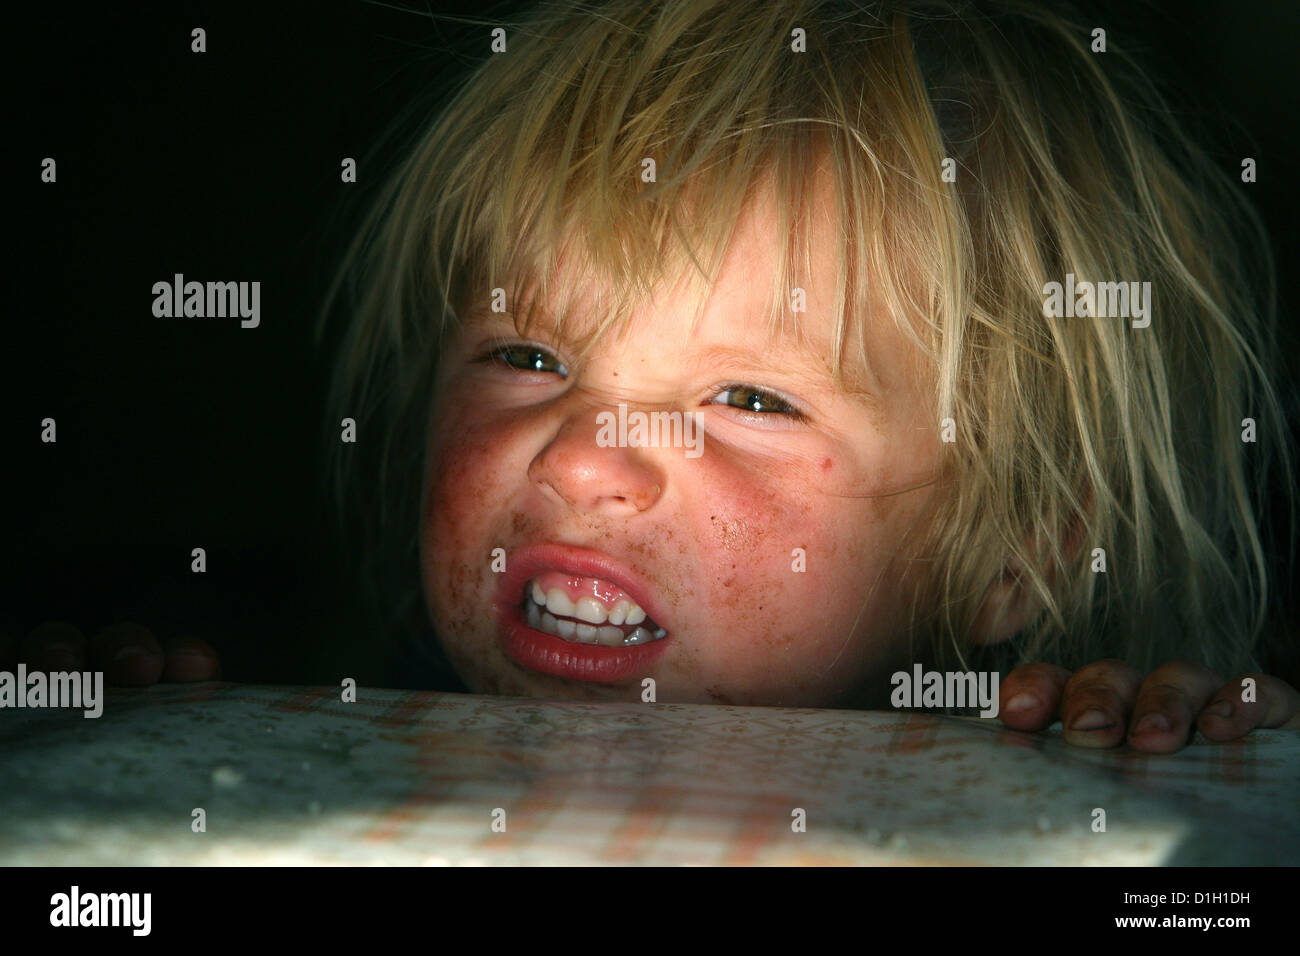 portrait of a blond boy dirty face toddler, child, kid 3-4 years old, grimace, teeth child face expression Stock Photo